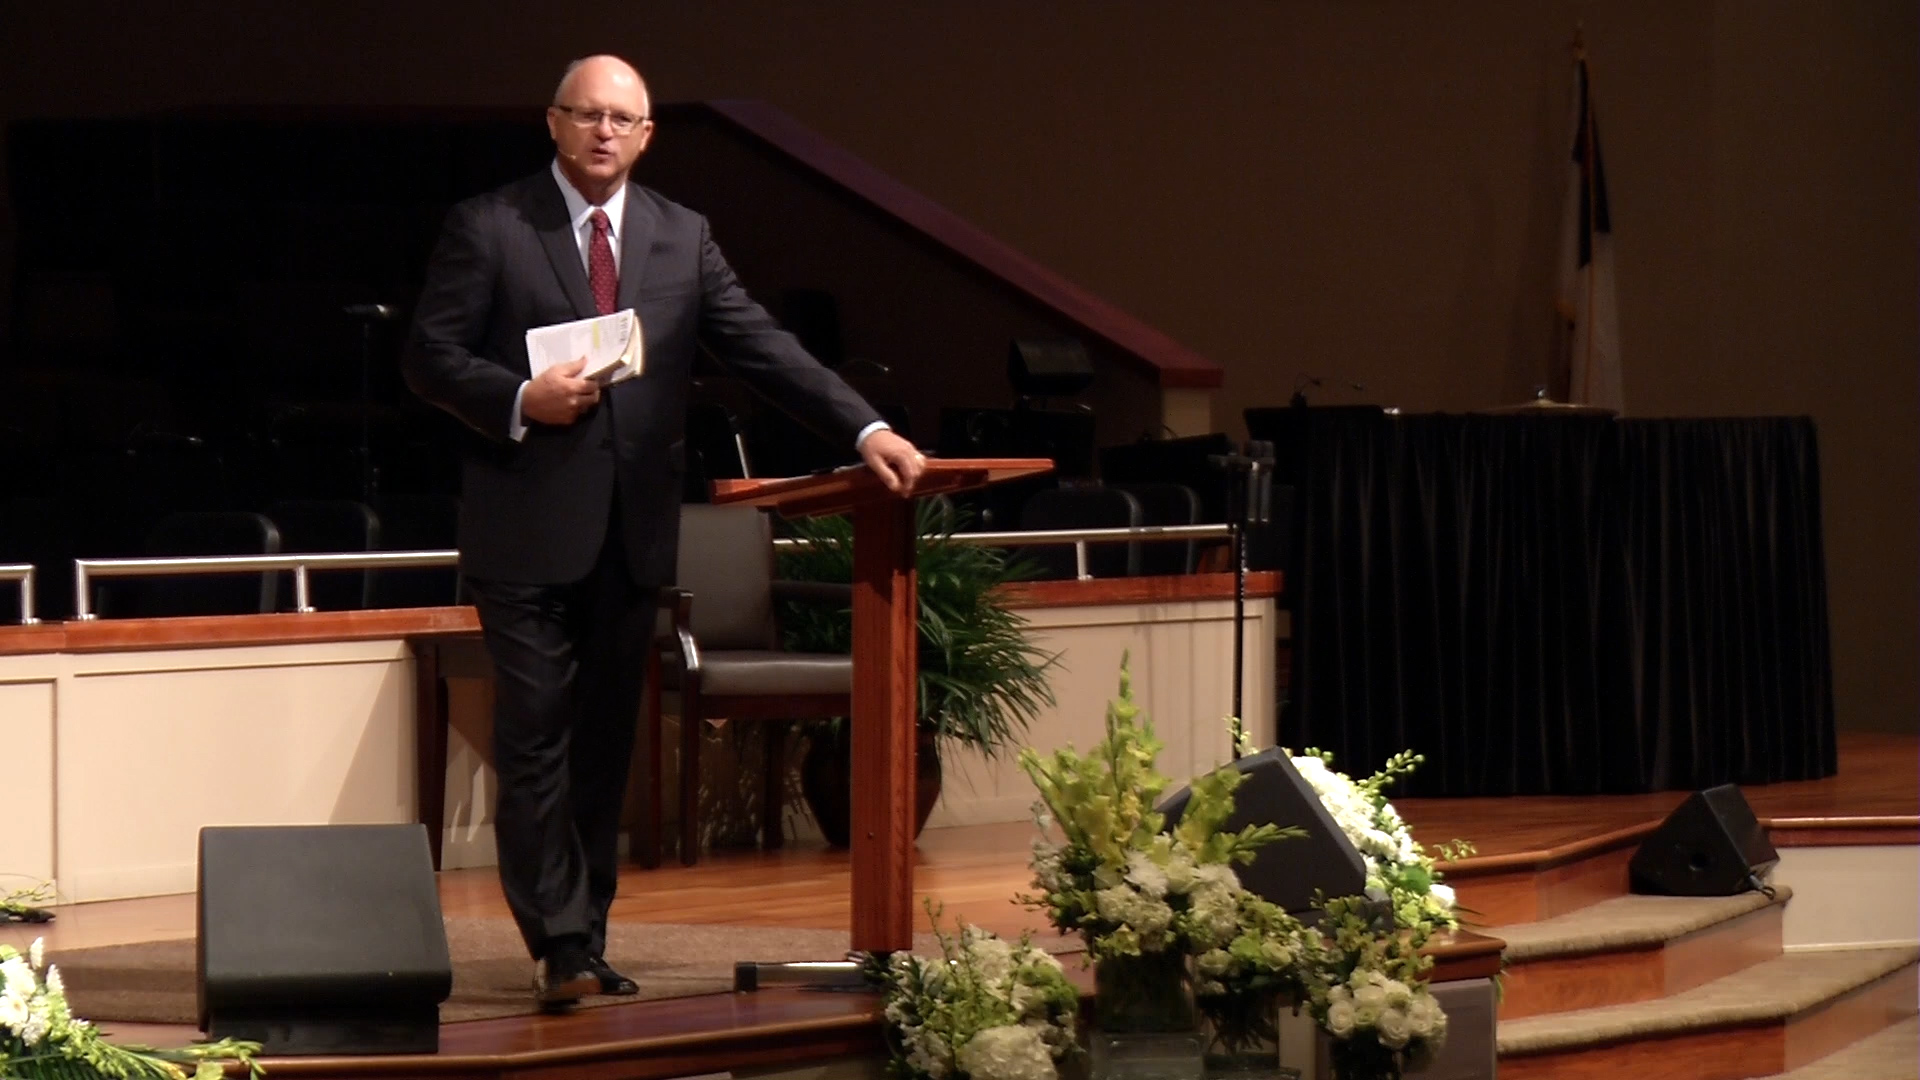 Pastor Paul Chappell: Ministering Grace in an Unraveling Culture